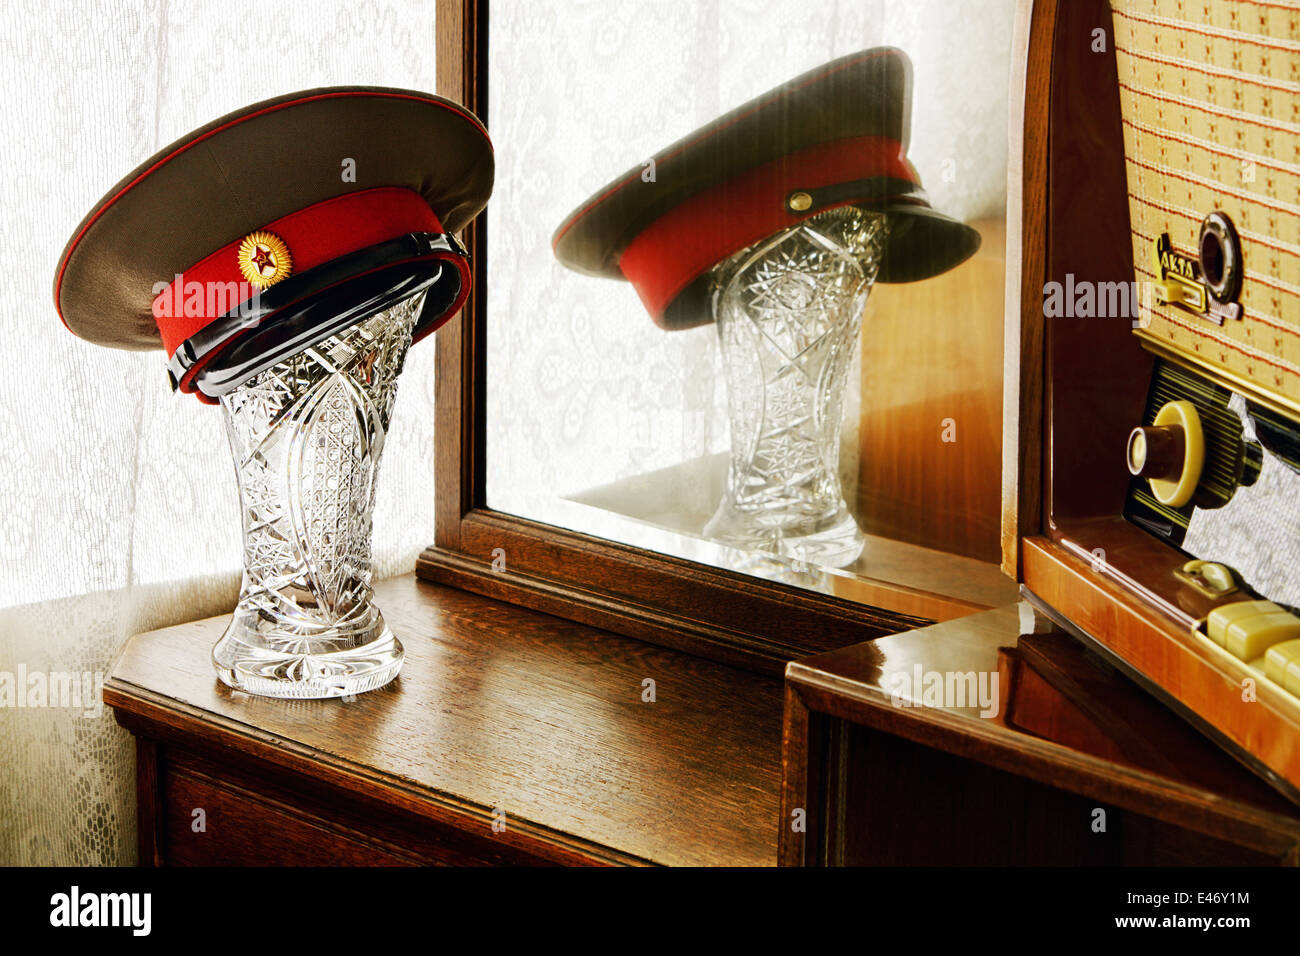 Soviet place of honor. Mirror, Latvian radiola and officer's cap on the crystal vase Stock Photo